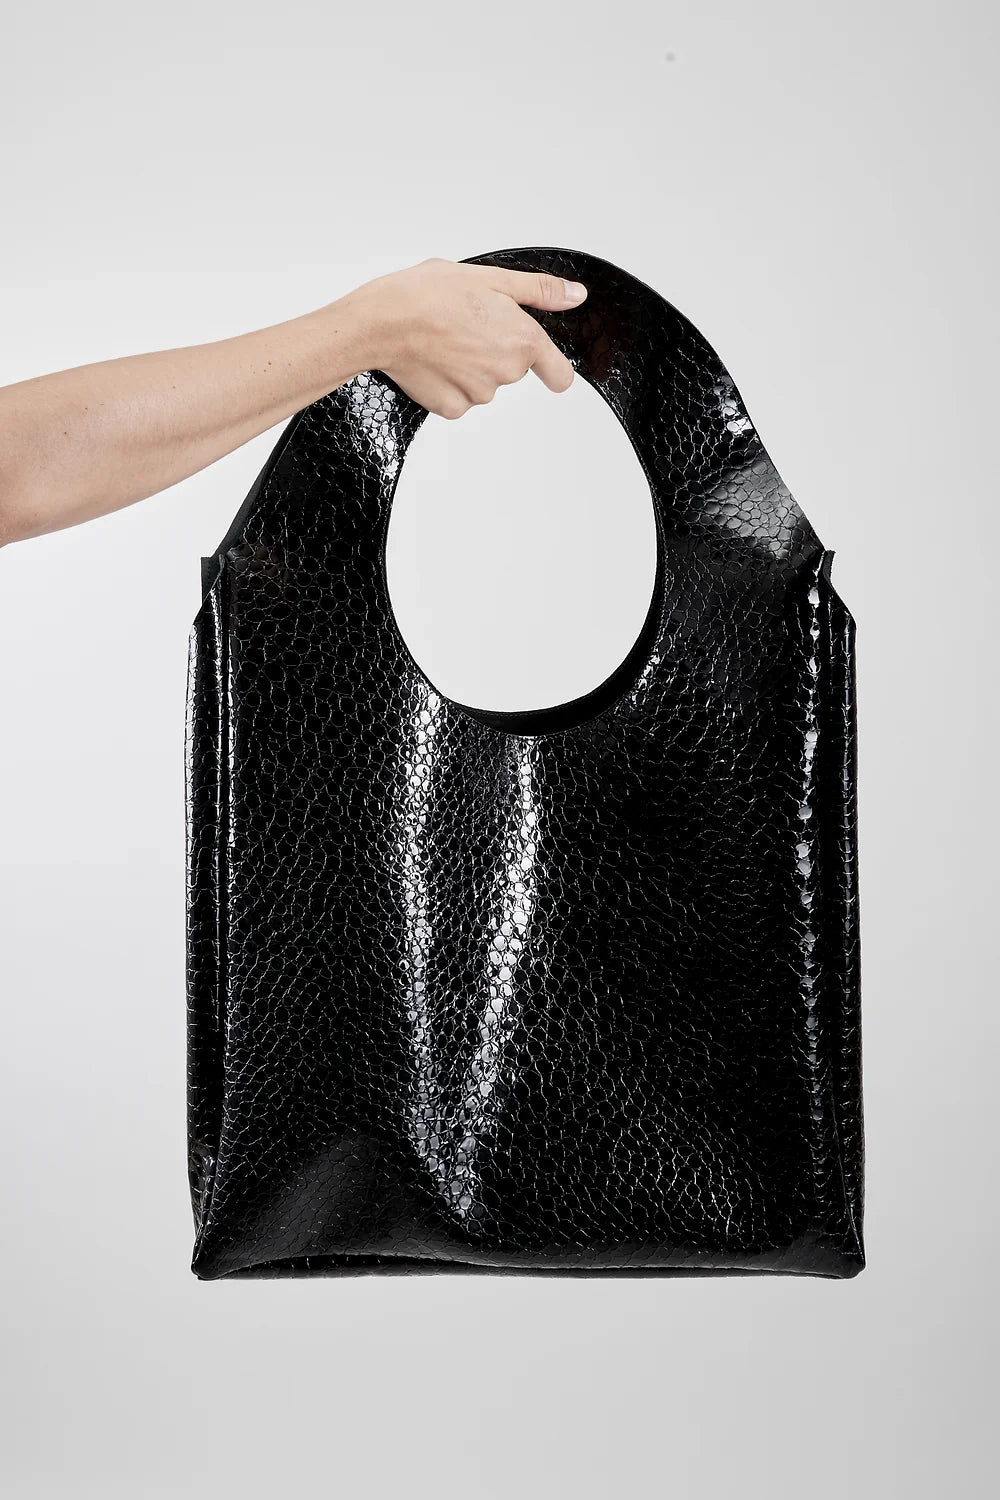 Bag nr 1 in leather by Lea Roesch